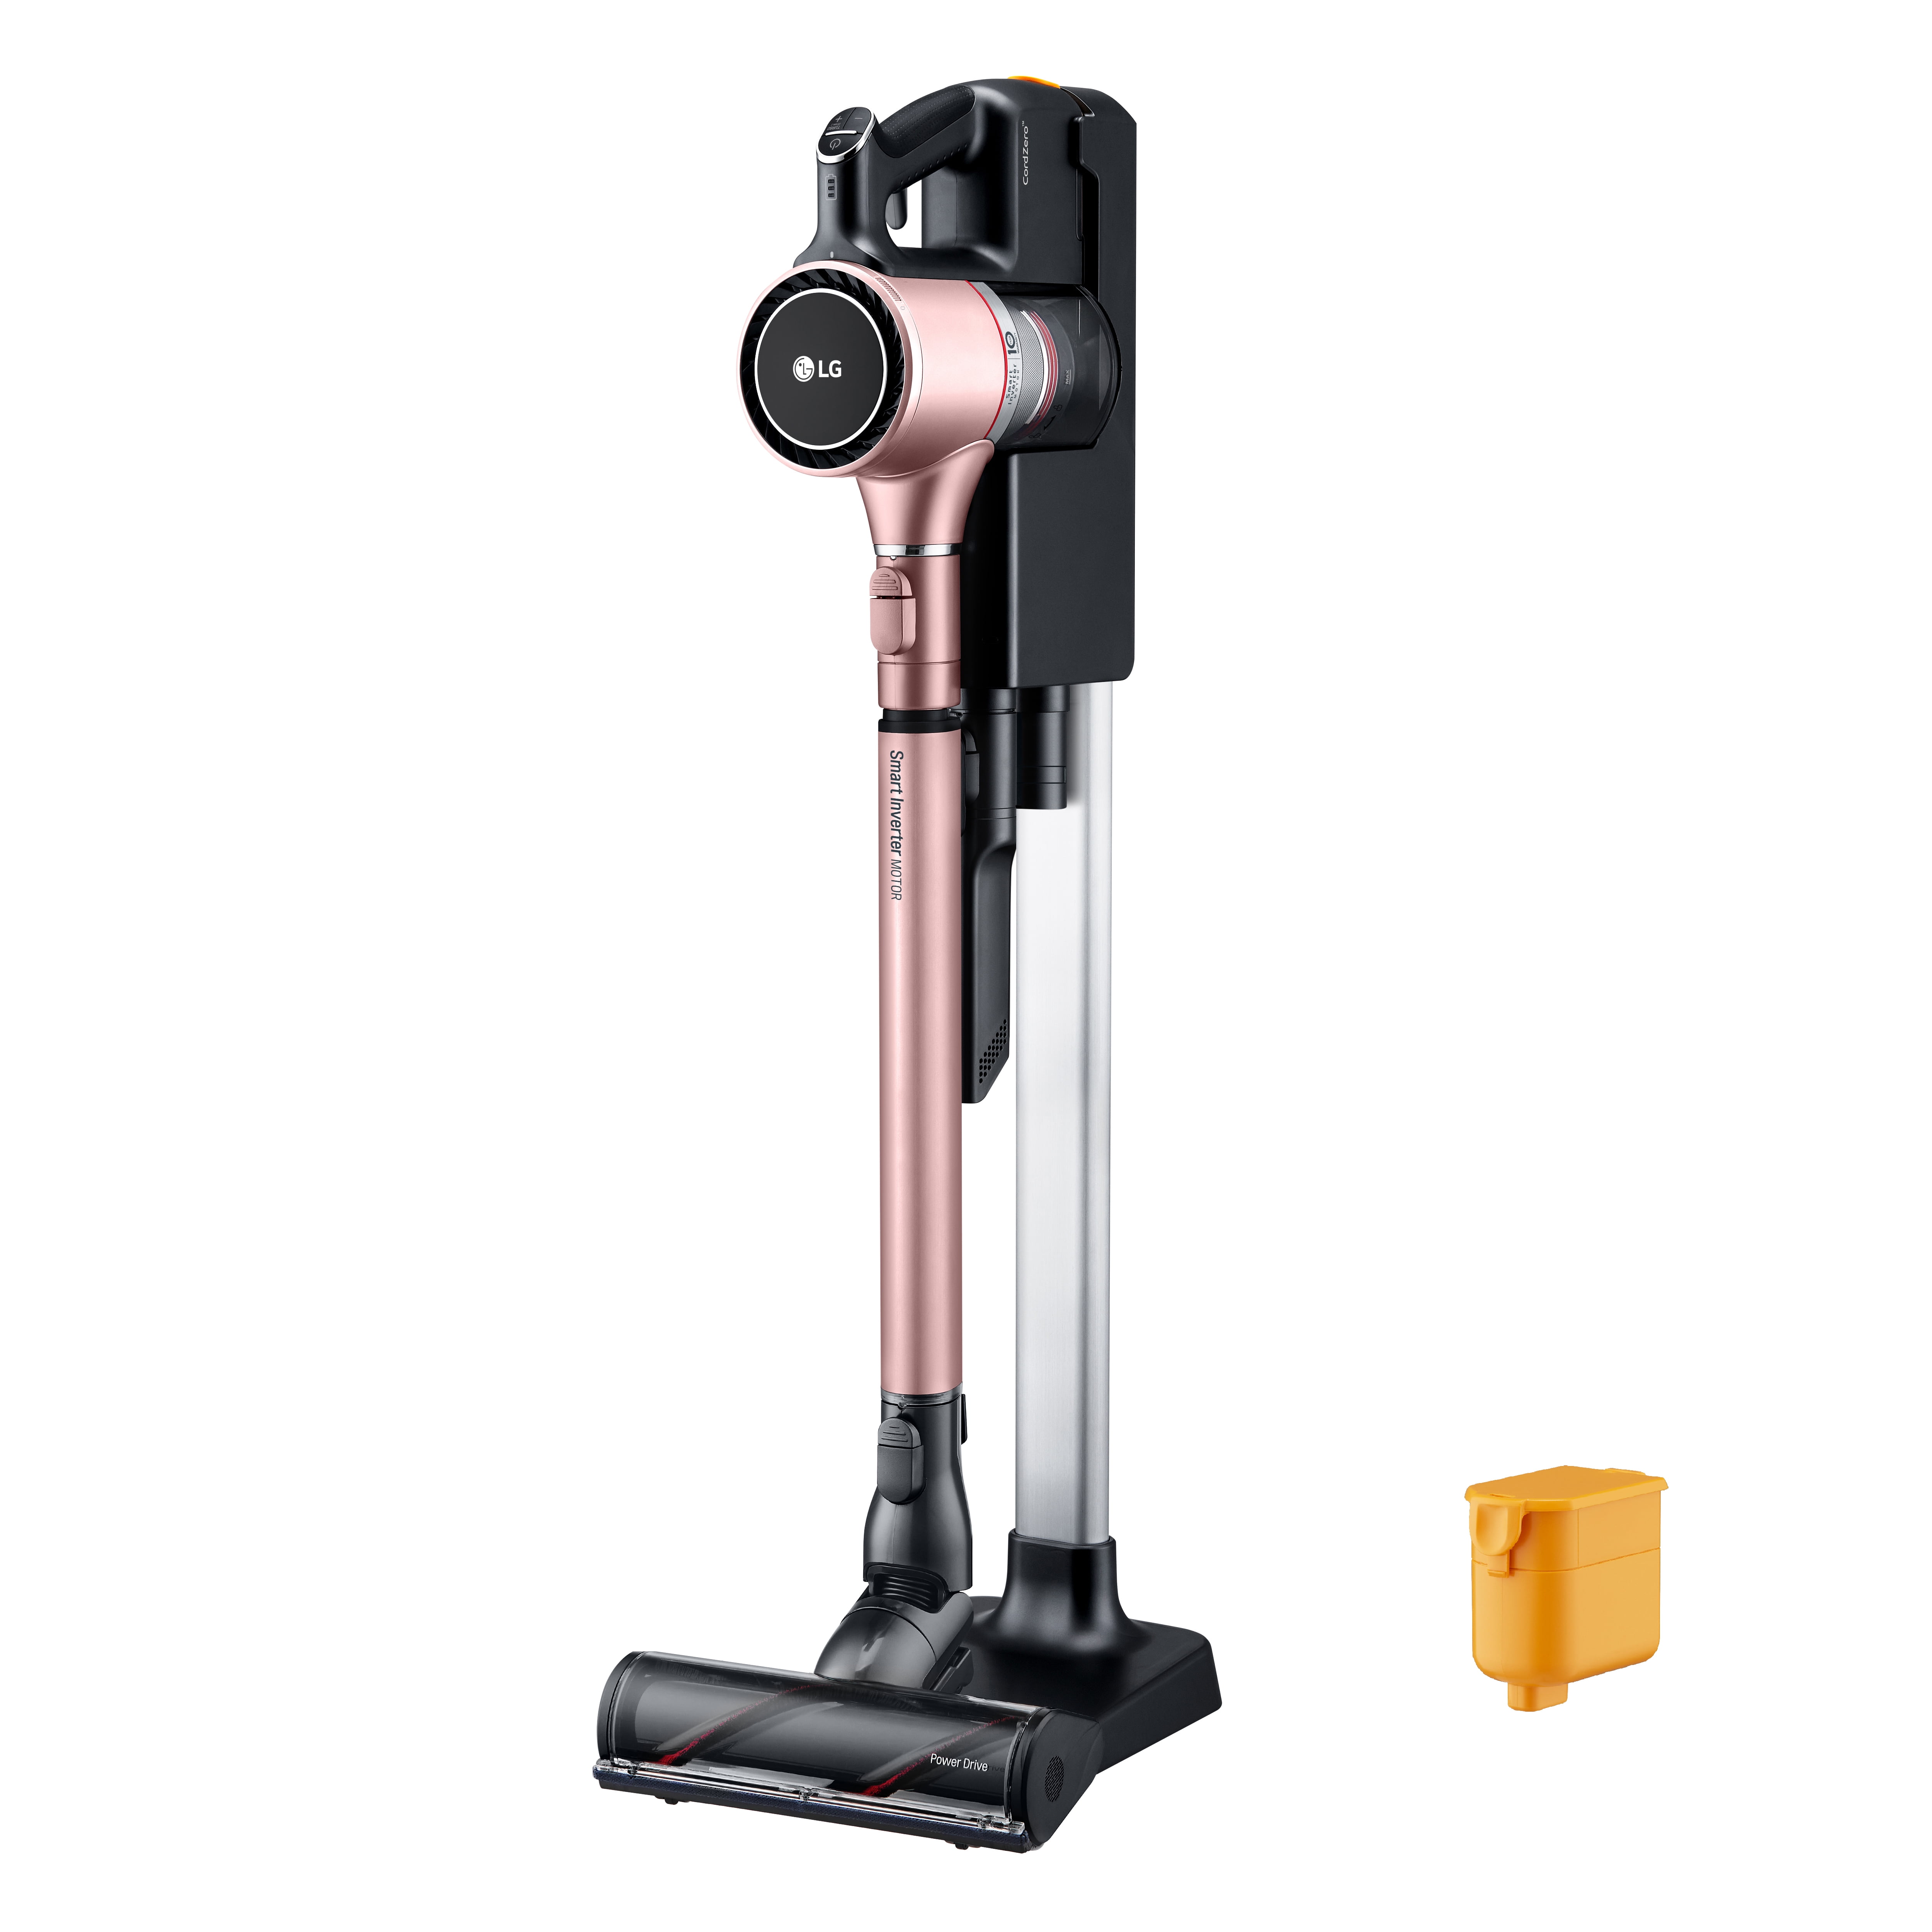 BLACK+DECKER POWERSERIES Extreme 20 Volt Cordless Pet Stick Vacuum  (Convertible To Handheld) in the Stick Vacuums department at